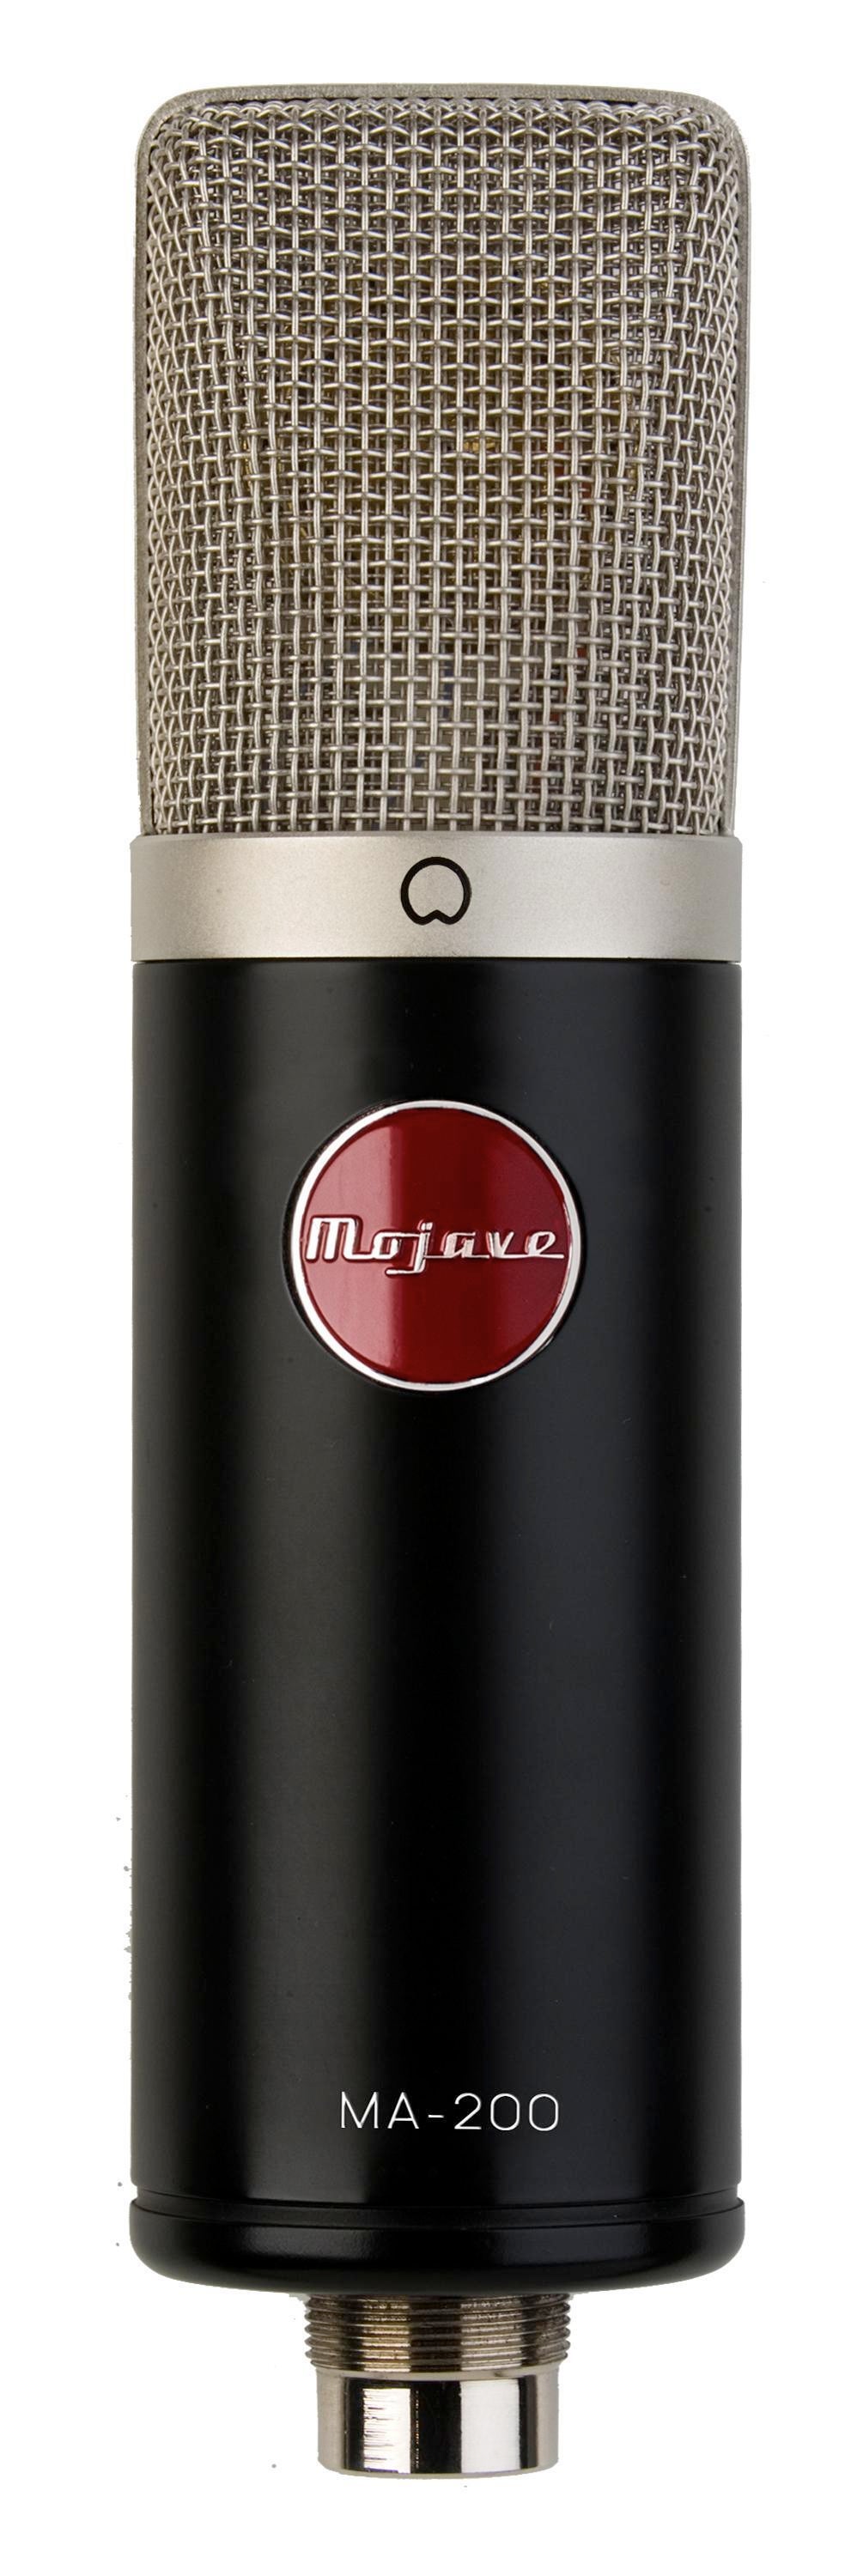 Mojave Audio MA-200 Large-diaphragm Tube Condenser Microphone Sweetwater